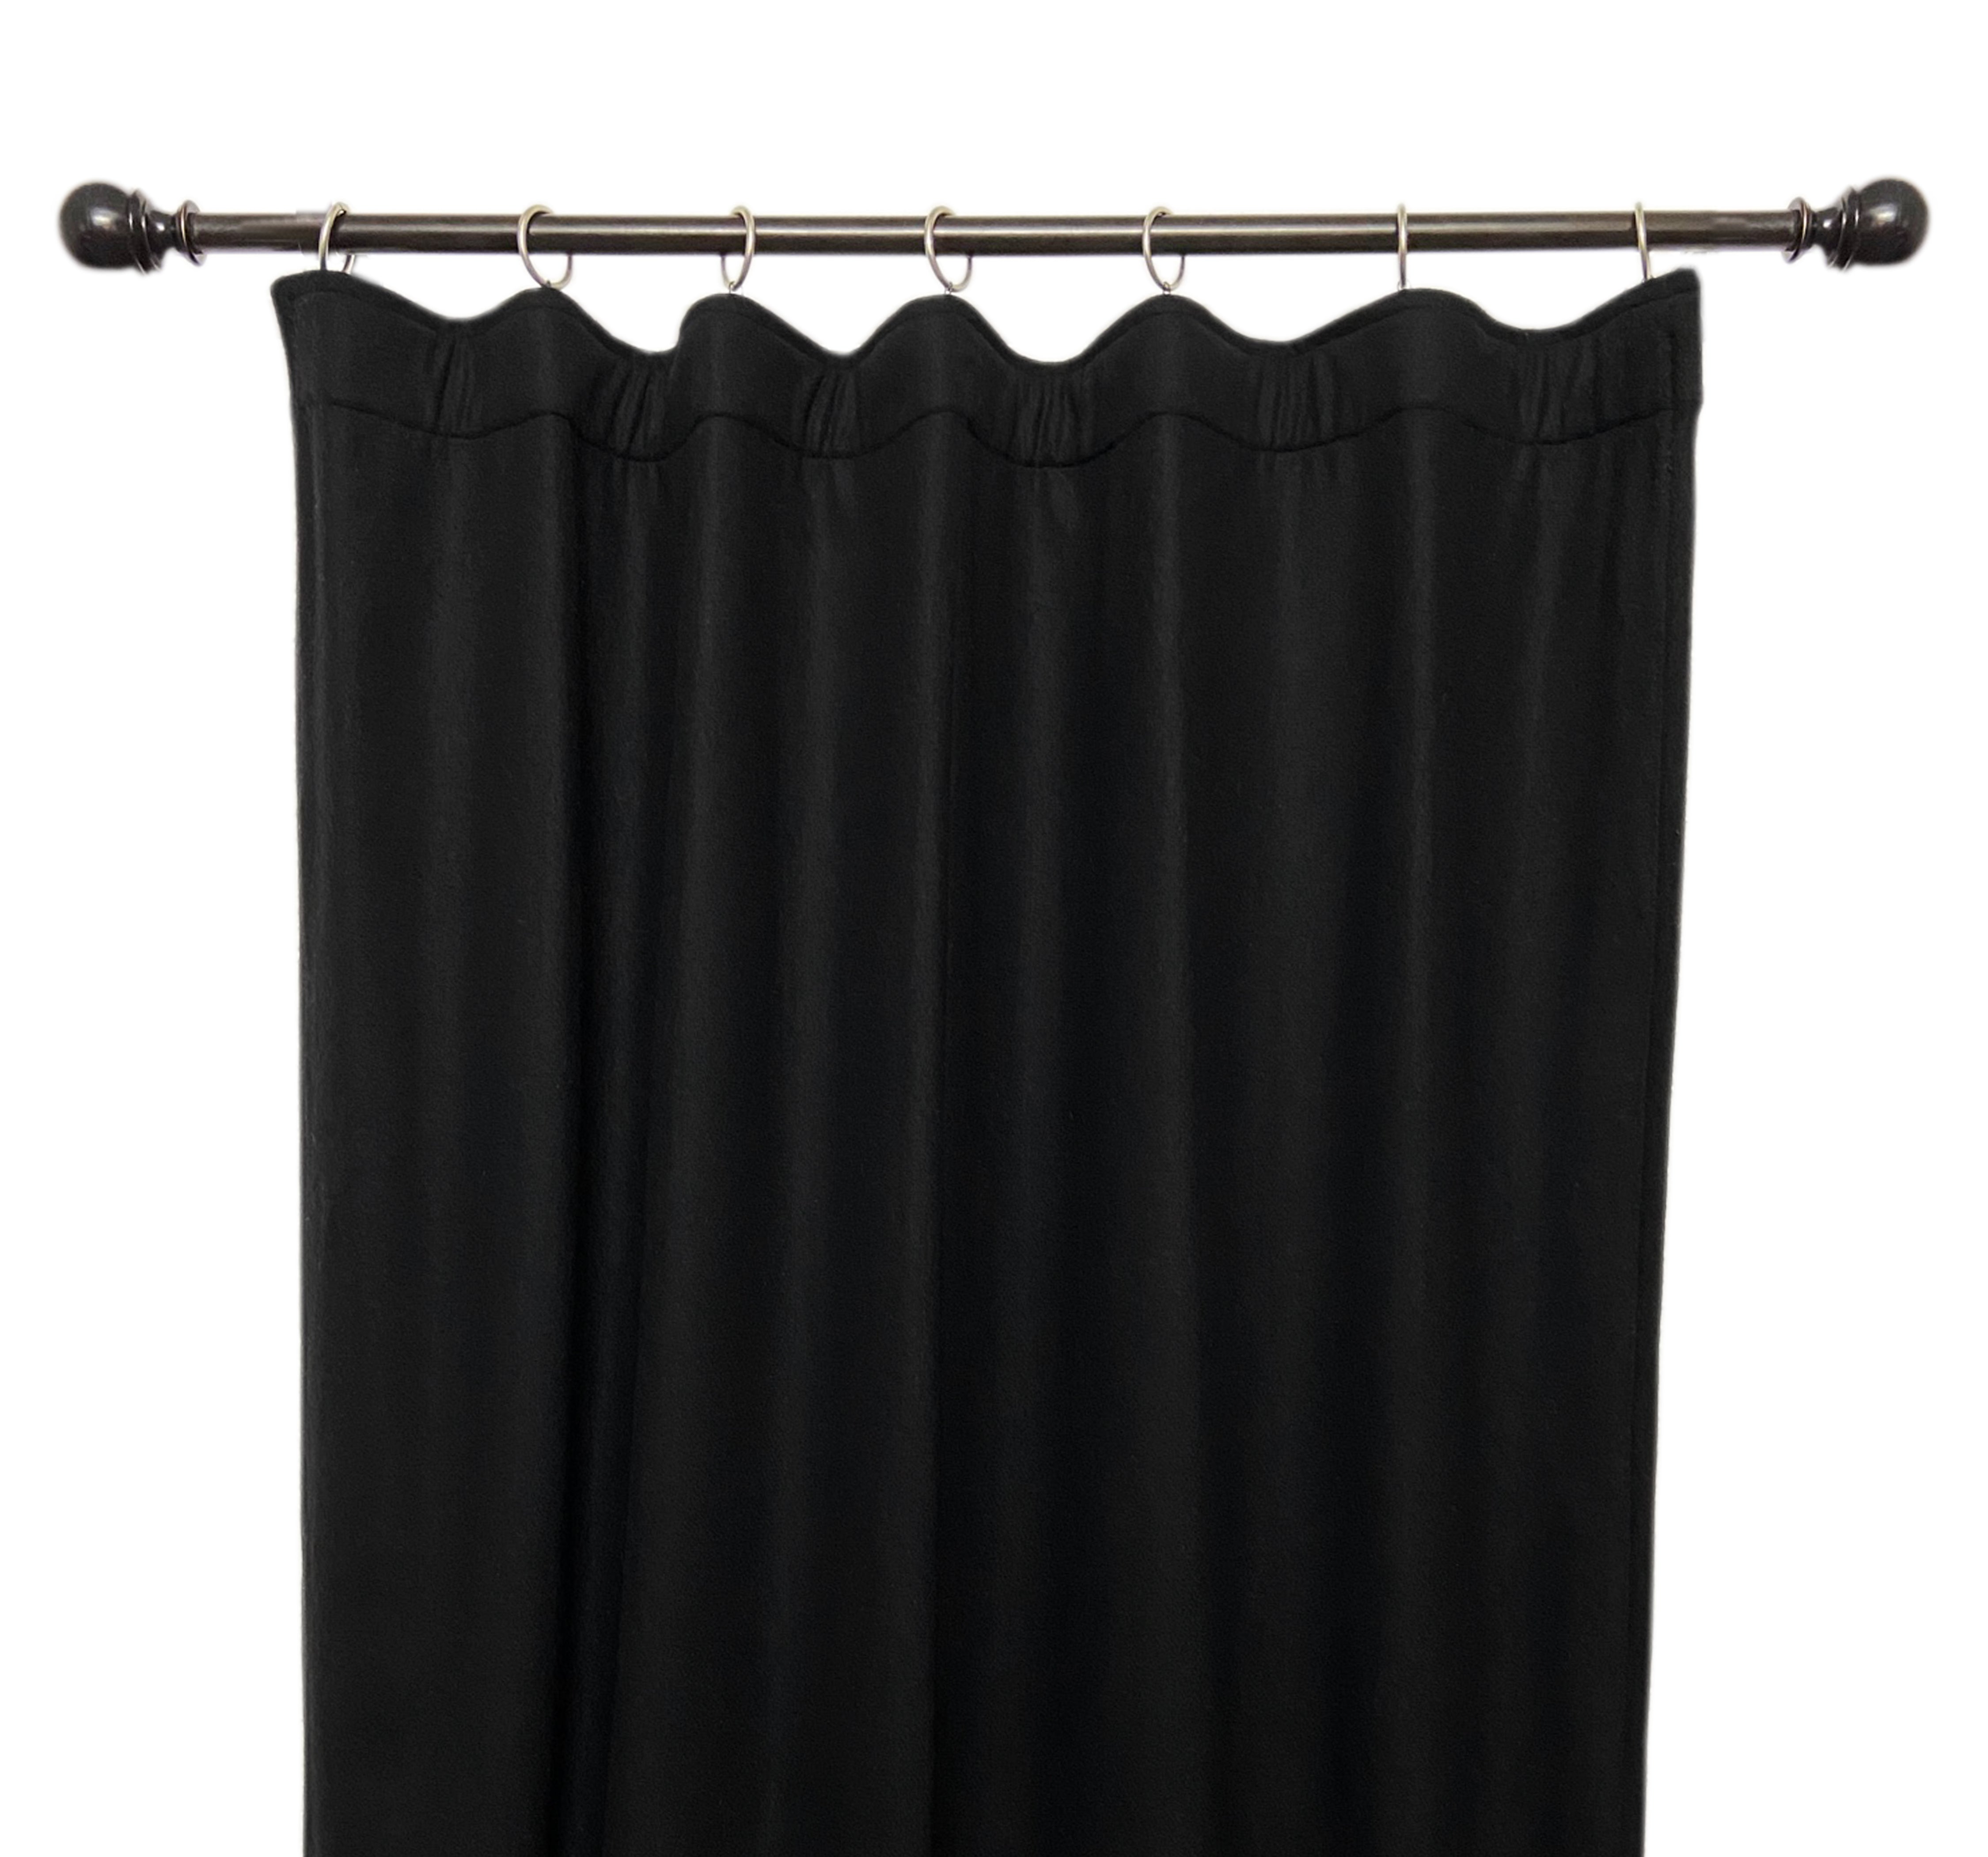 Amore Beaute double layered custom made wool curtains are crafted from soft felt fabric to help block noise, cut cold draft and block light.